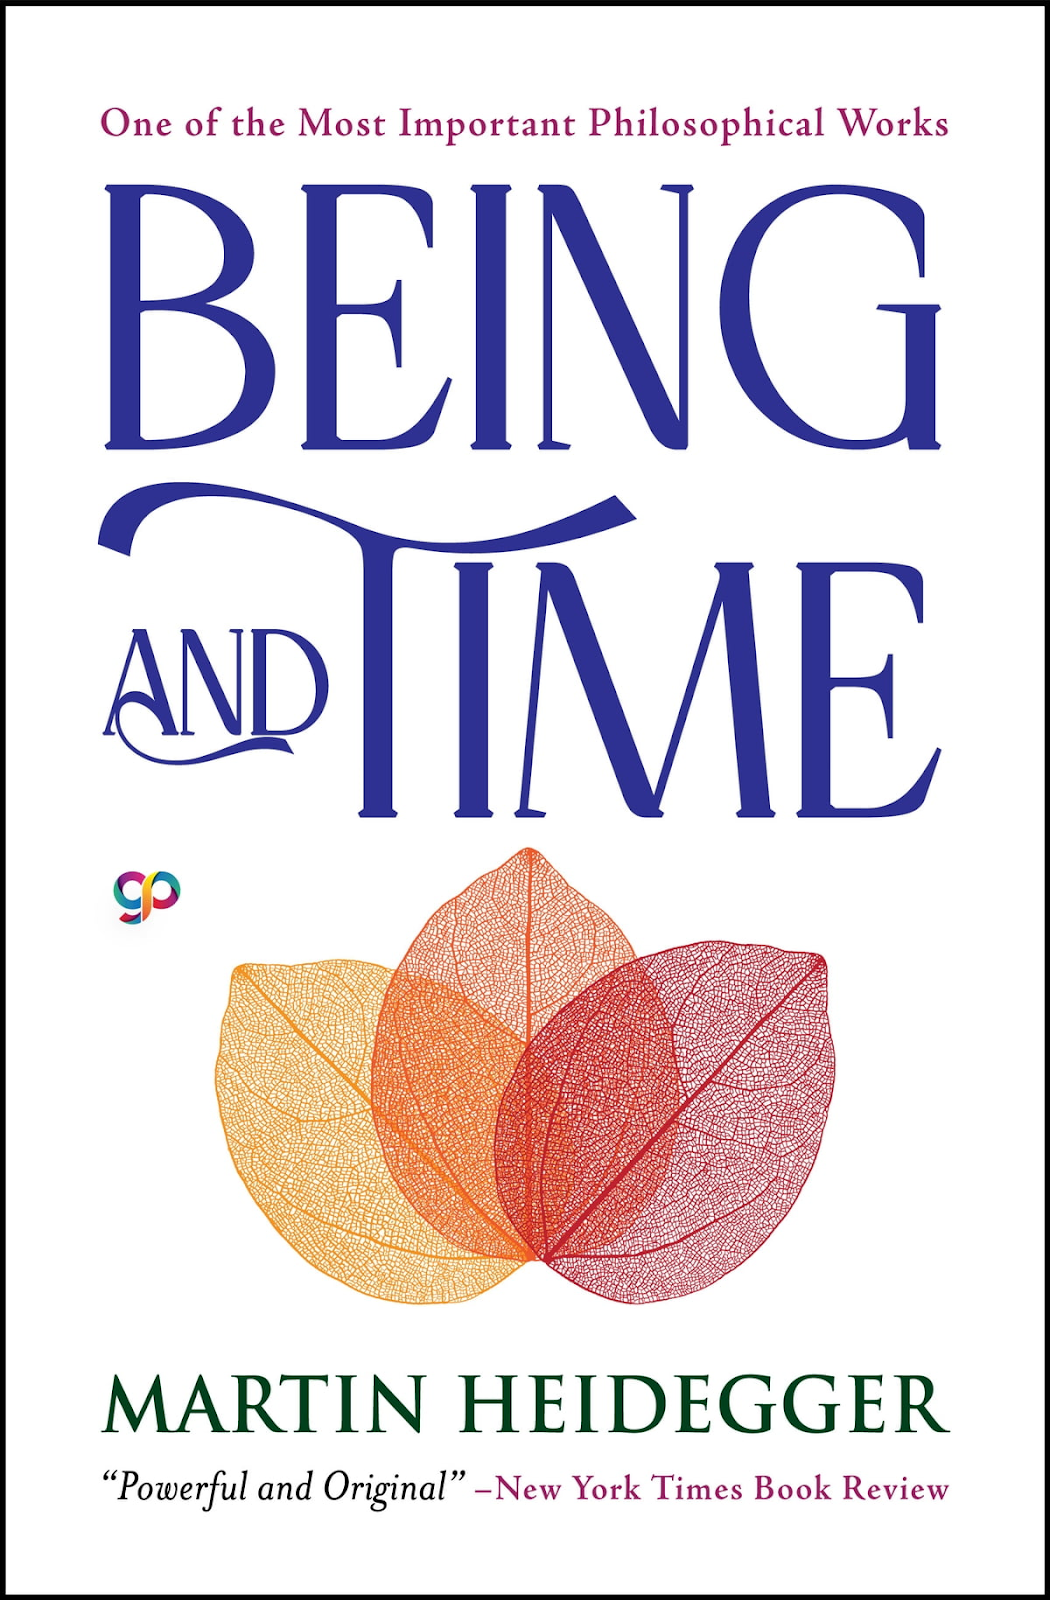 metaphysics book: being and time